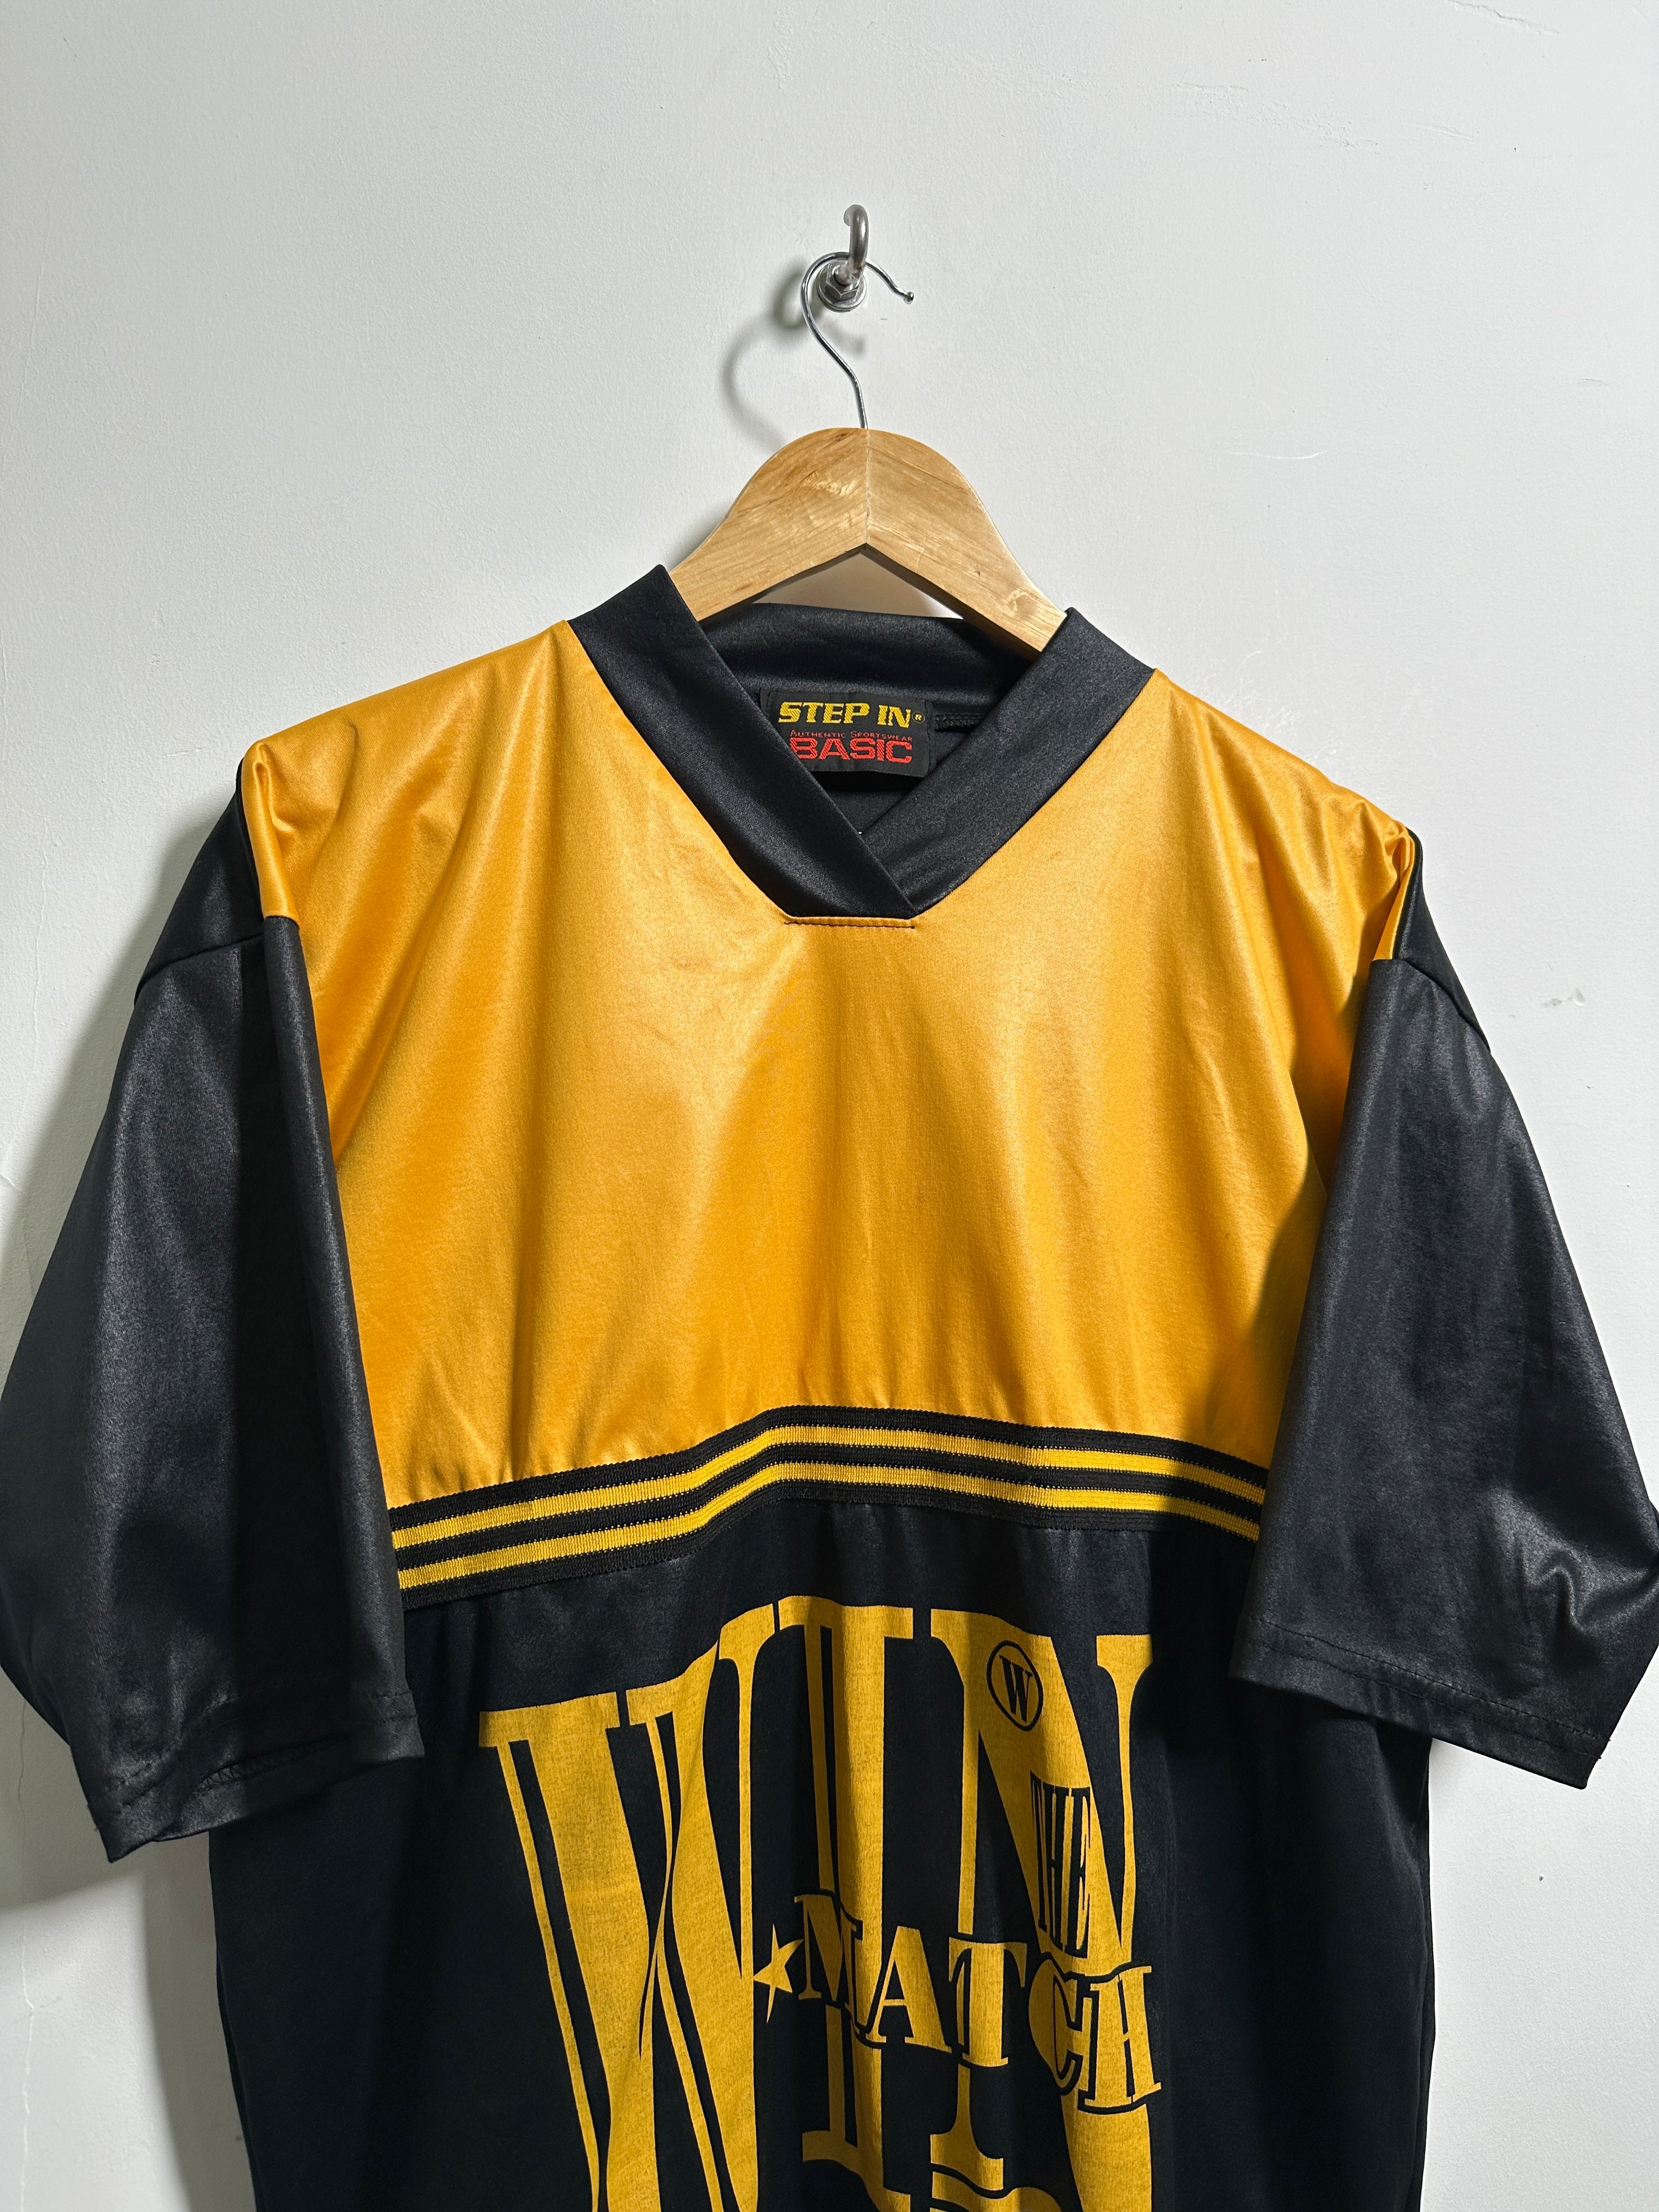 Vintage v-neck tee in black and yellow